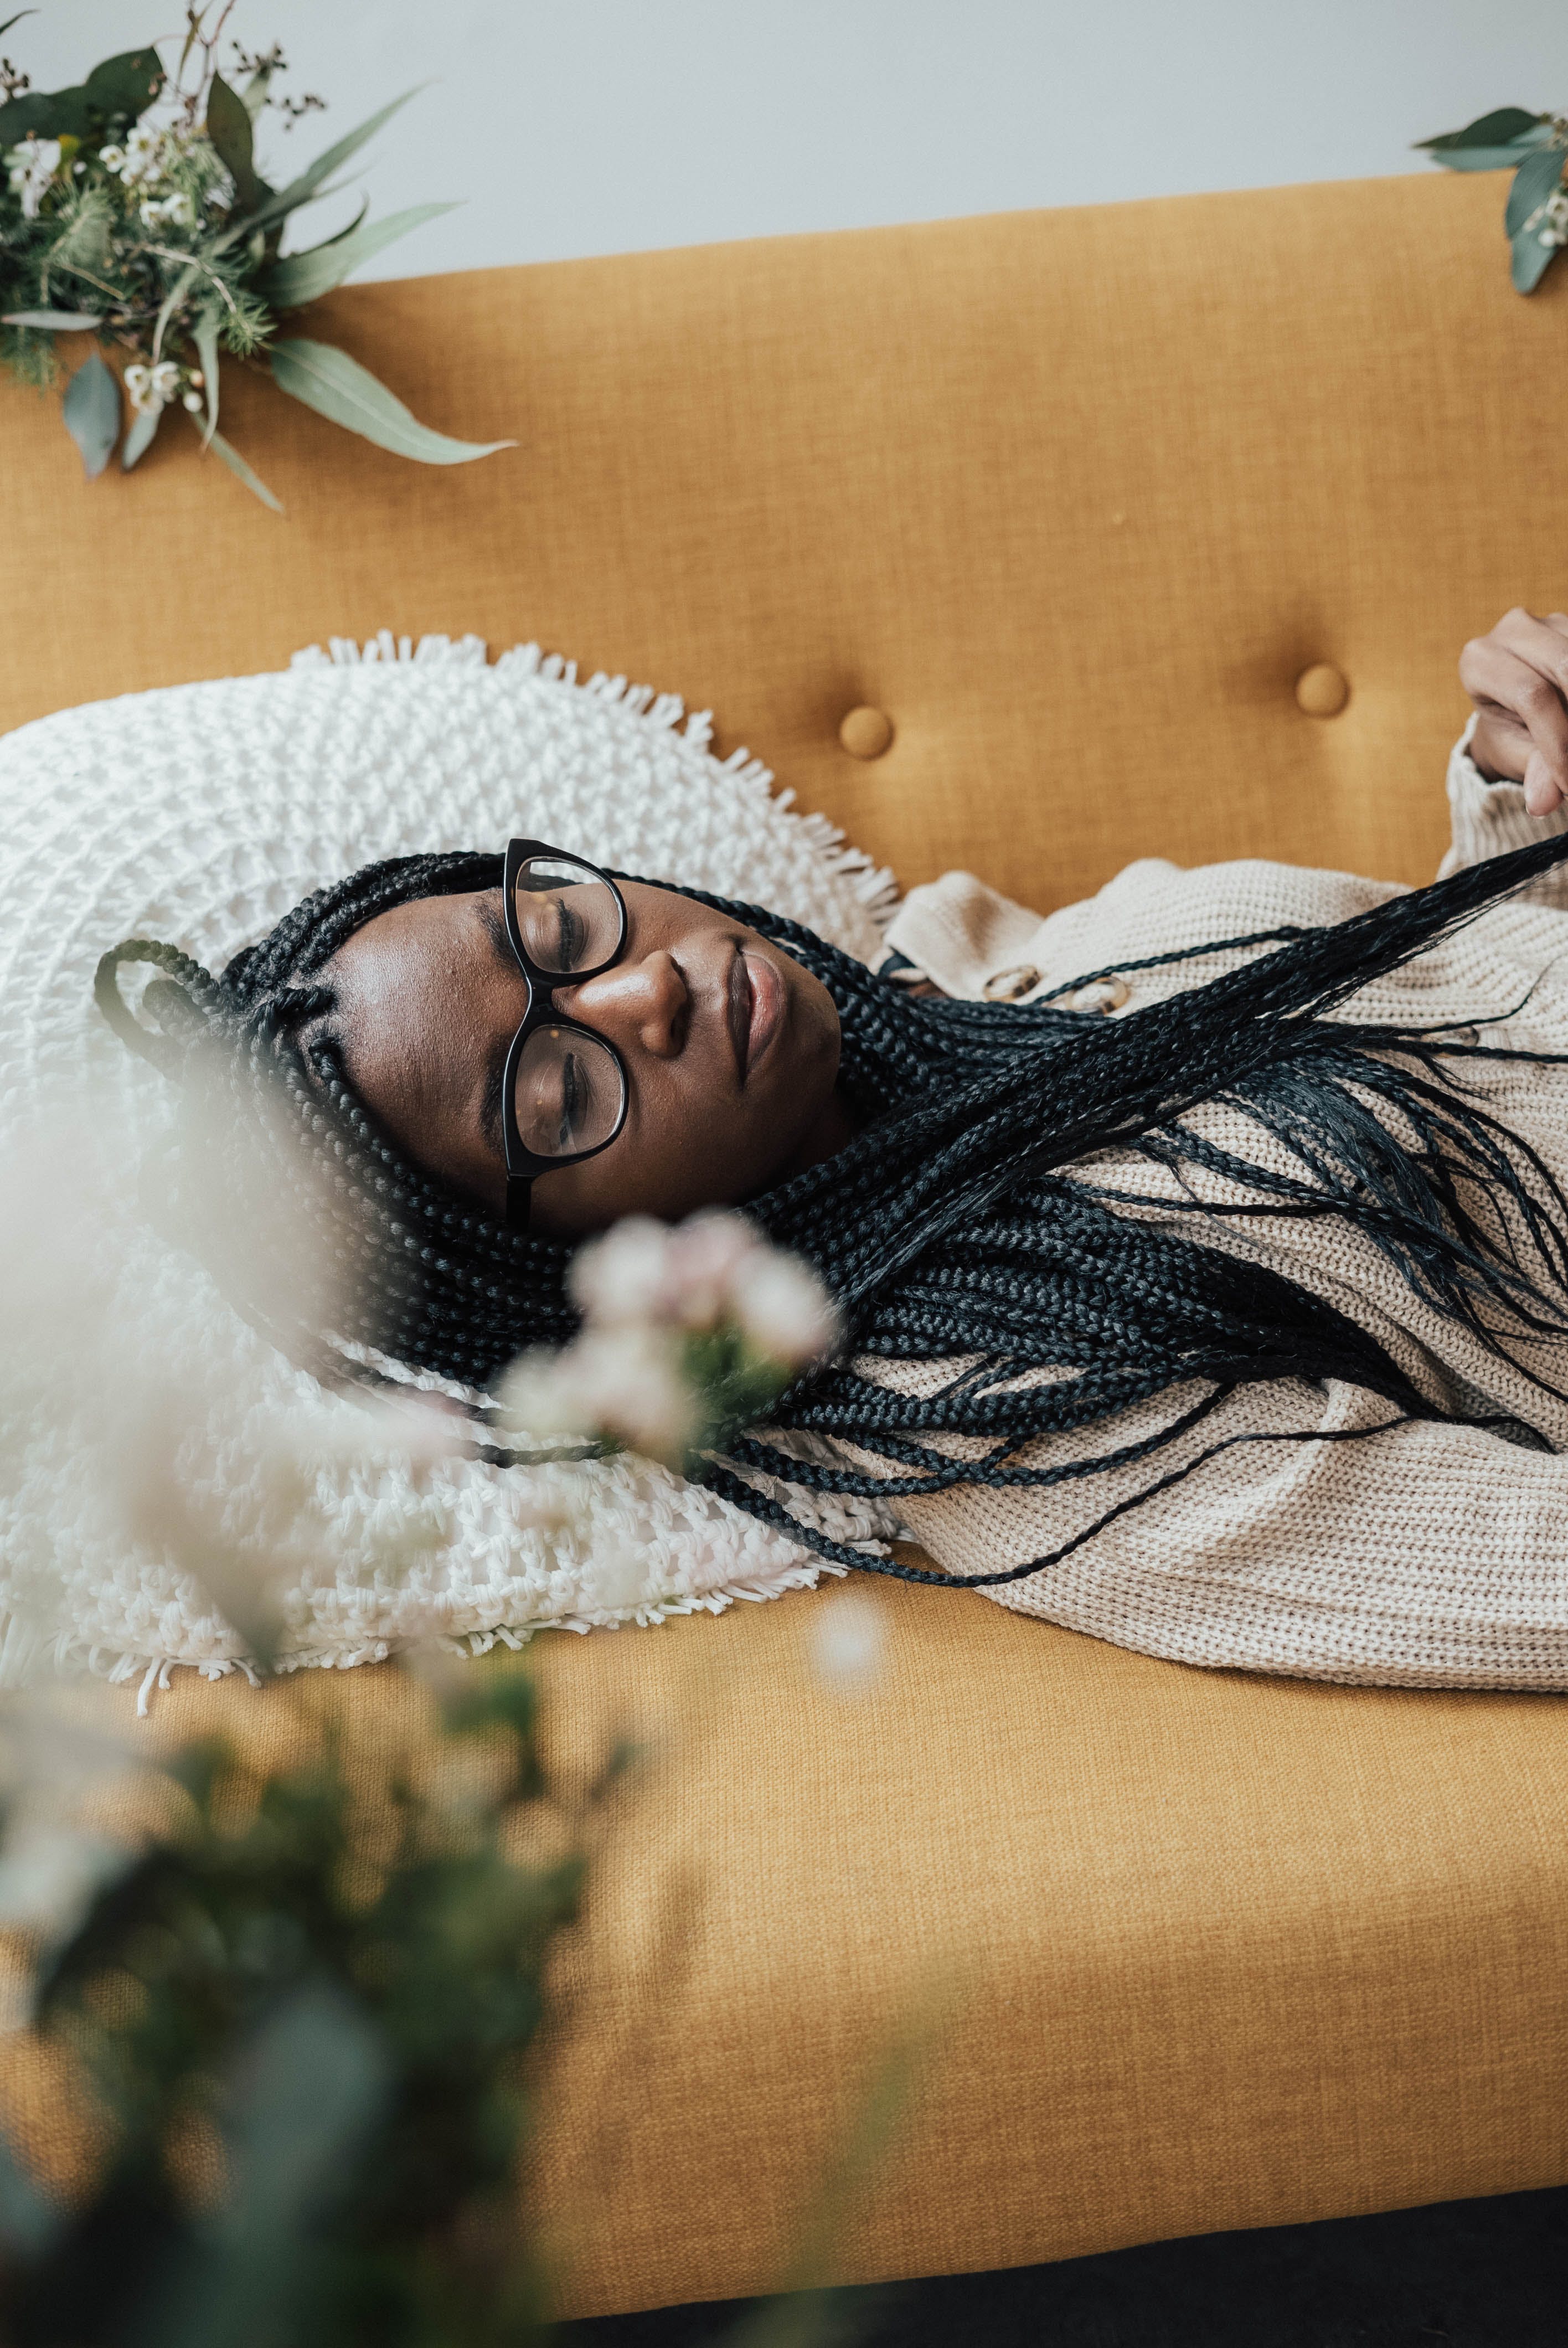 A woman sleeping on a couch | Source: Pexels